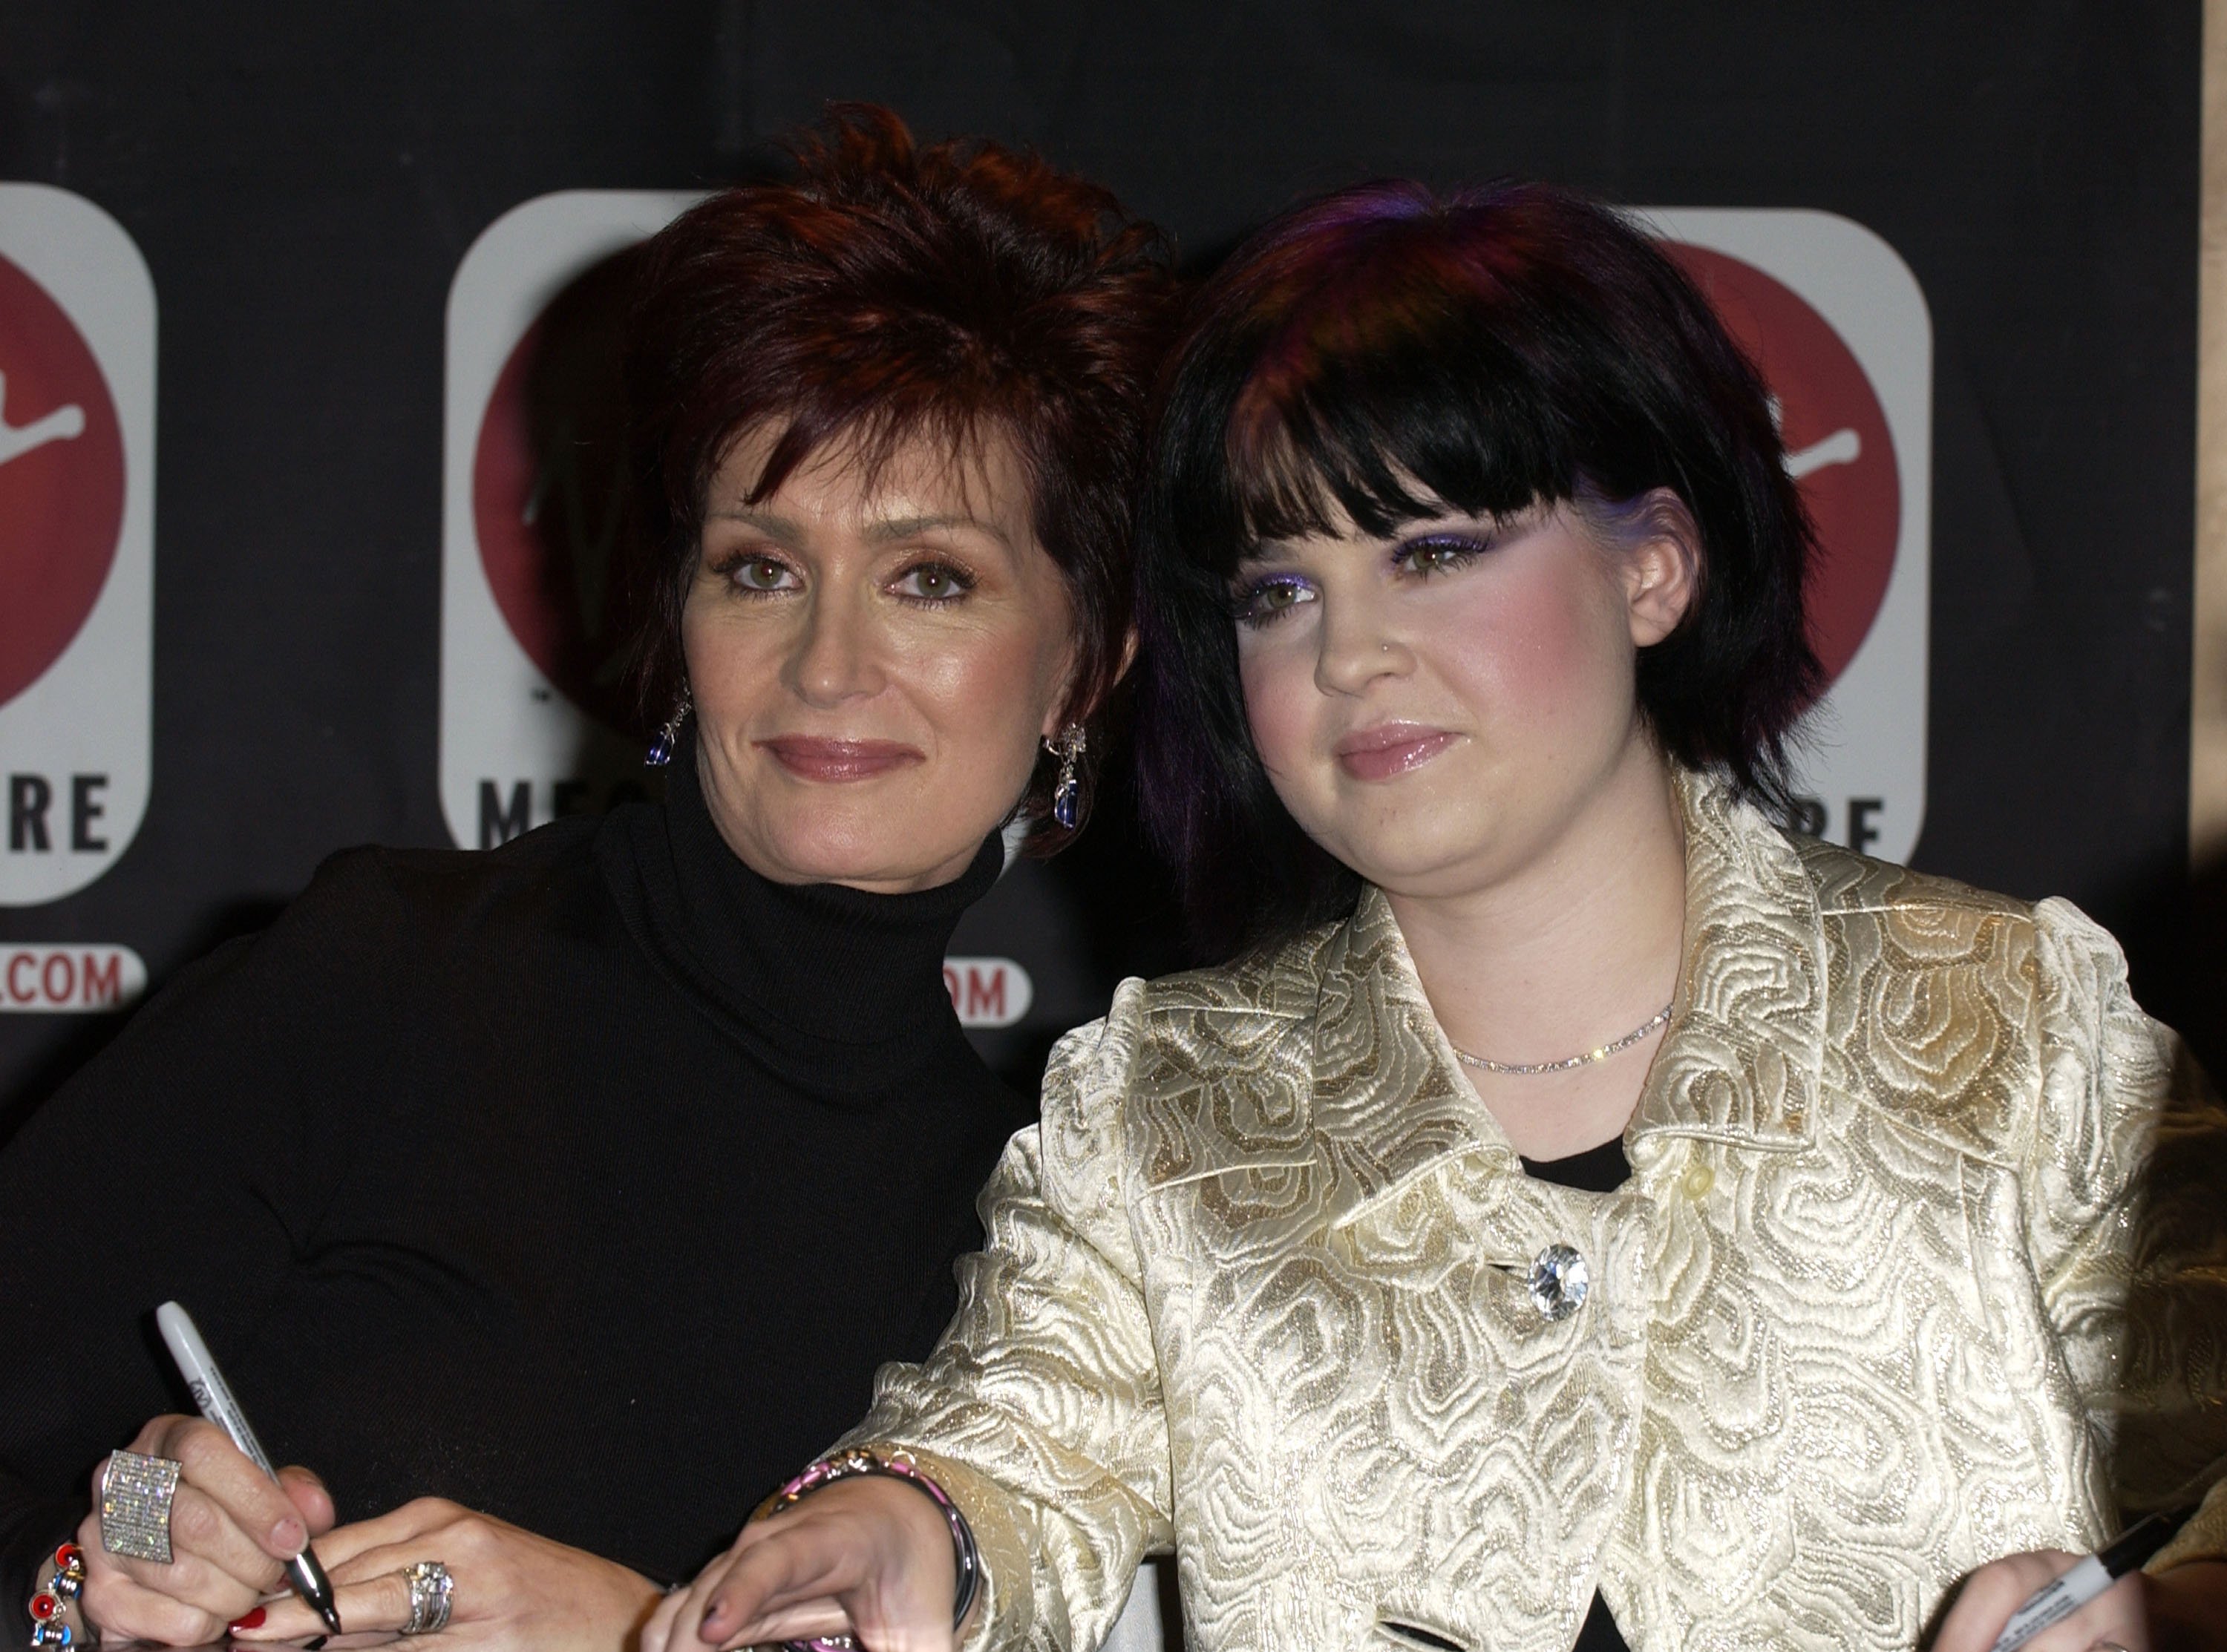 TV host Sharon Osbourne and her daughter Kelly Osbourne during The Osbournes In-Store Appearance for the Release of "The Osbournes First Season" DVD at Virgin Megastore on March 4, 2003 in Los Angeles, California┃Source: Getty Images